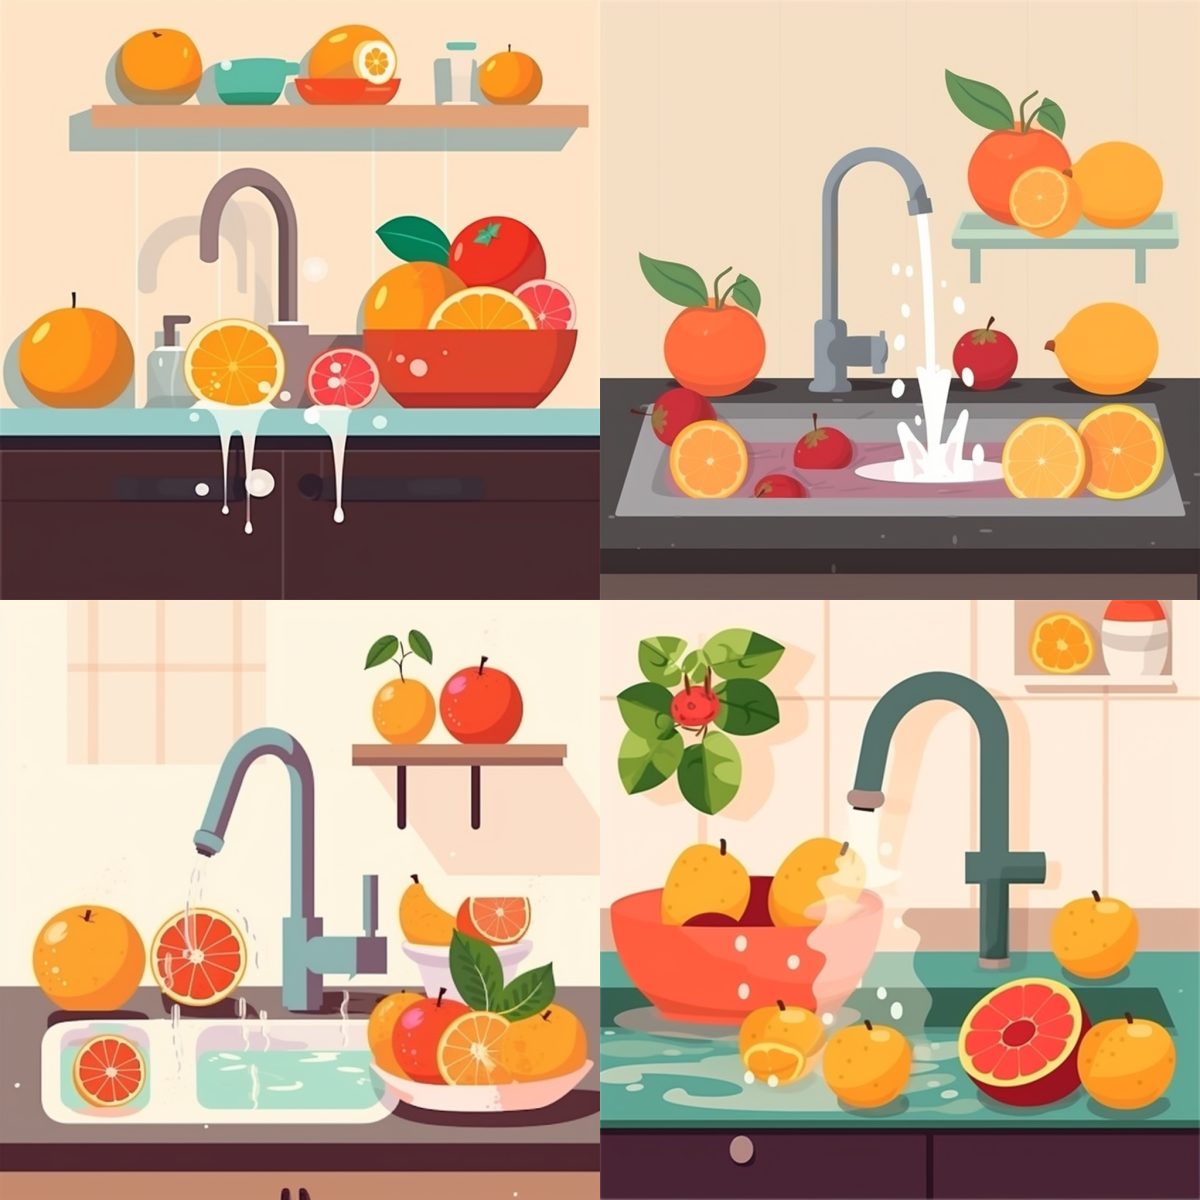 Senwater_washing_orange_American_kitchen_water_from_faucet_appl_520944b7-9cea-4d3f-9cb6-afd9b1193c54